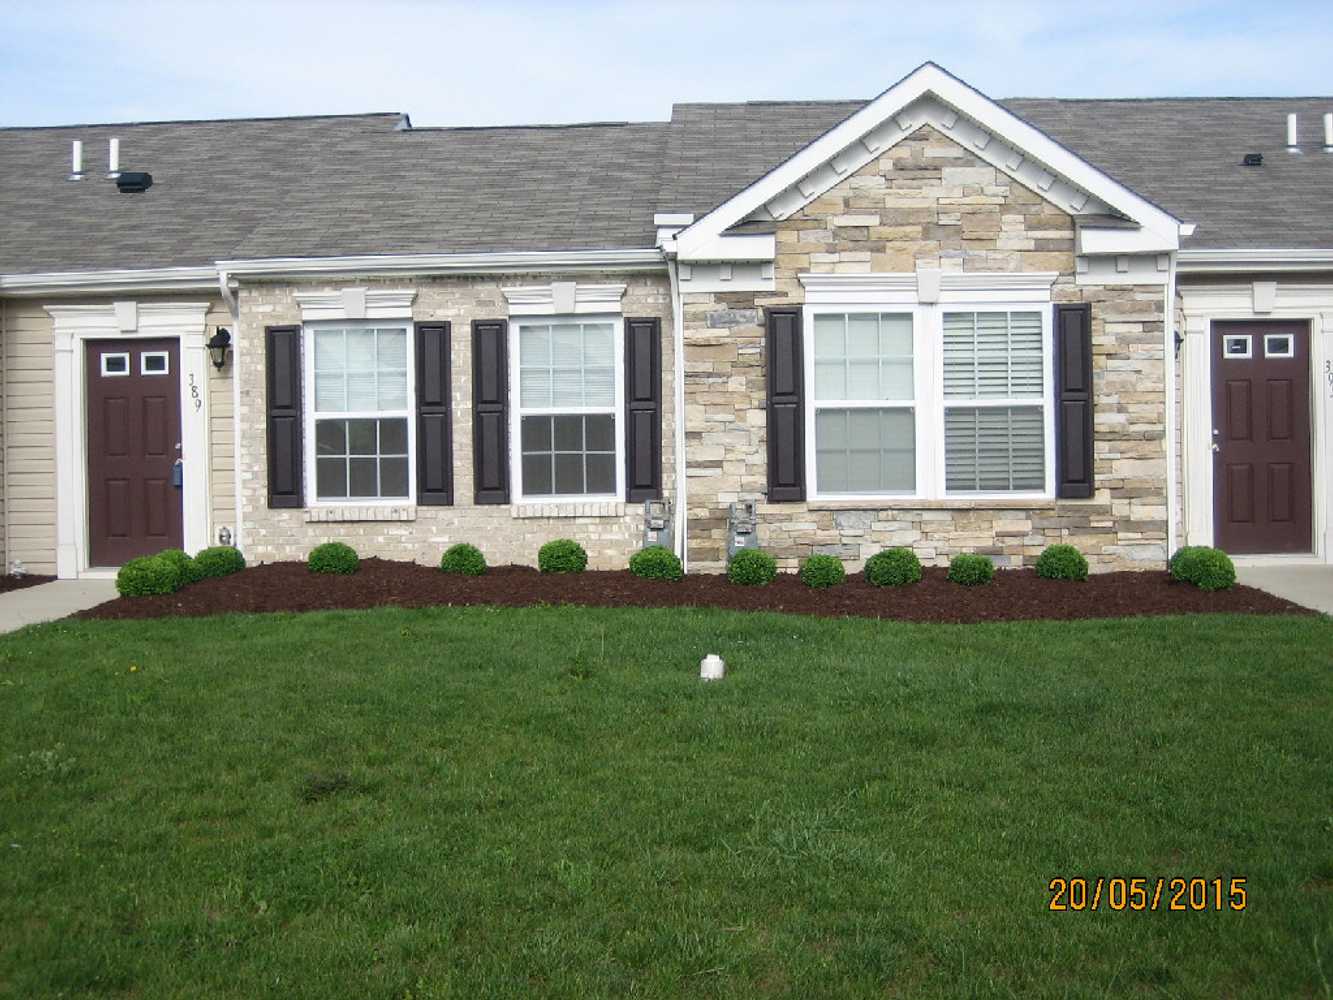 Photos from Javornick Lawn And Landscape LLC